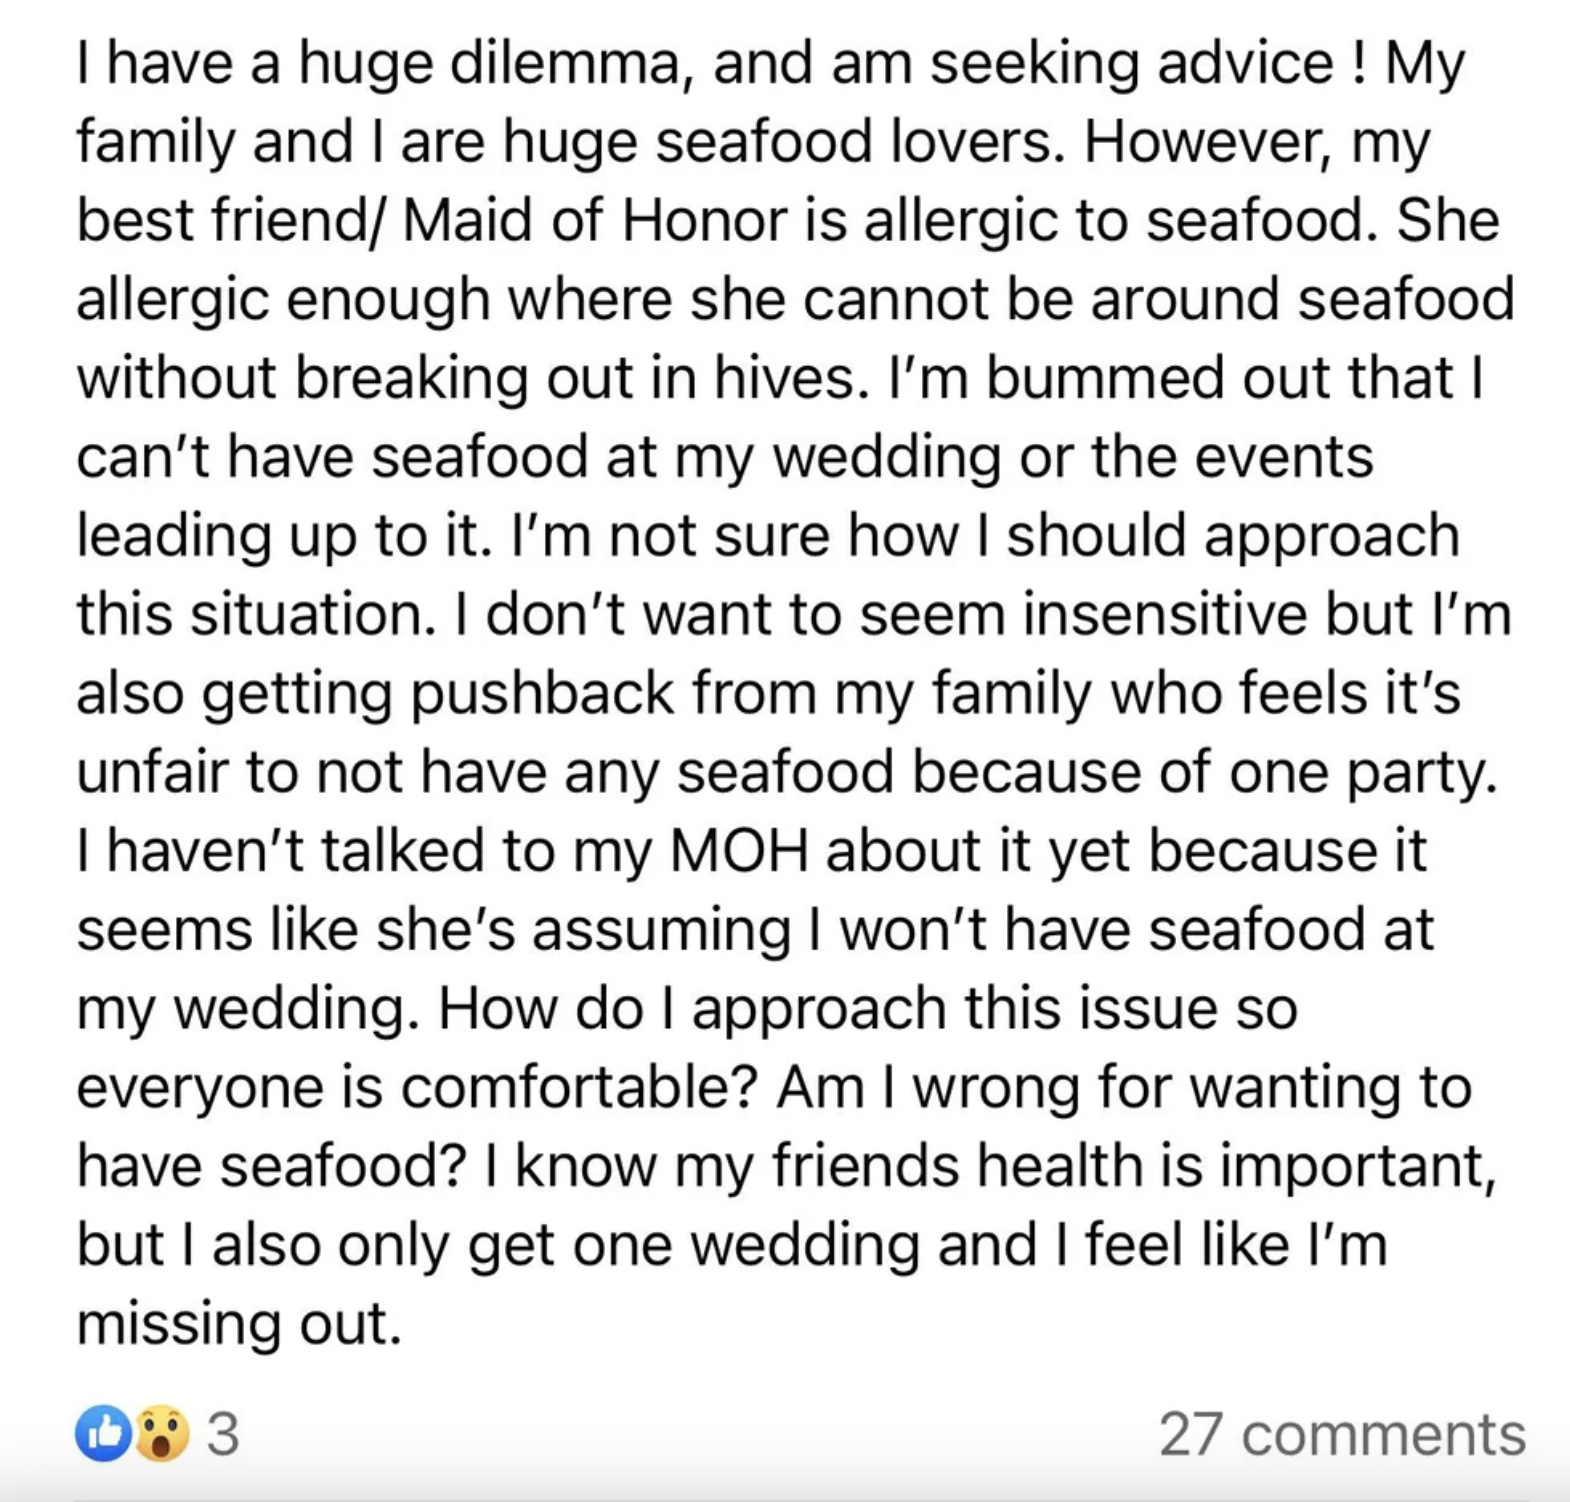 &quot;My best friend/Maid of Honor is allergic to seafood.&quot;